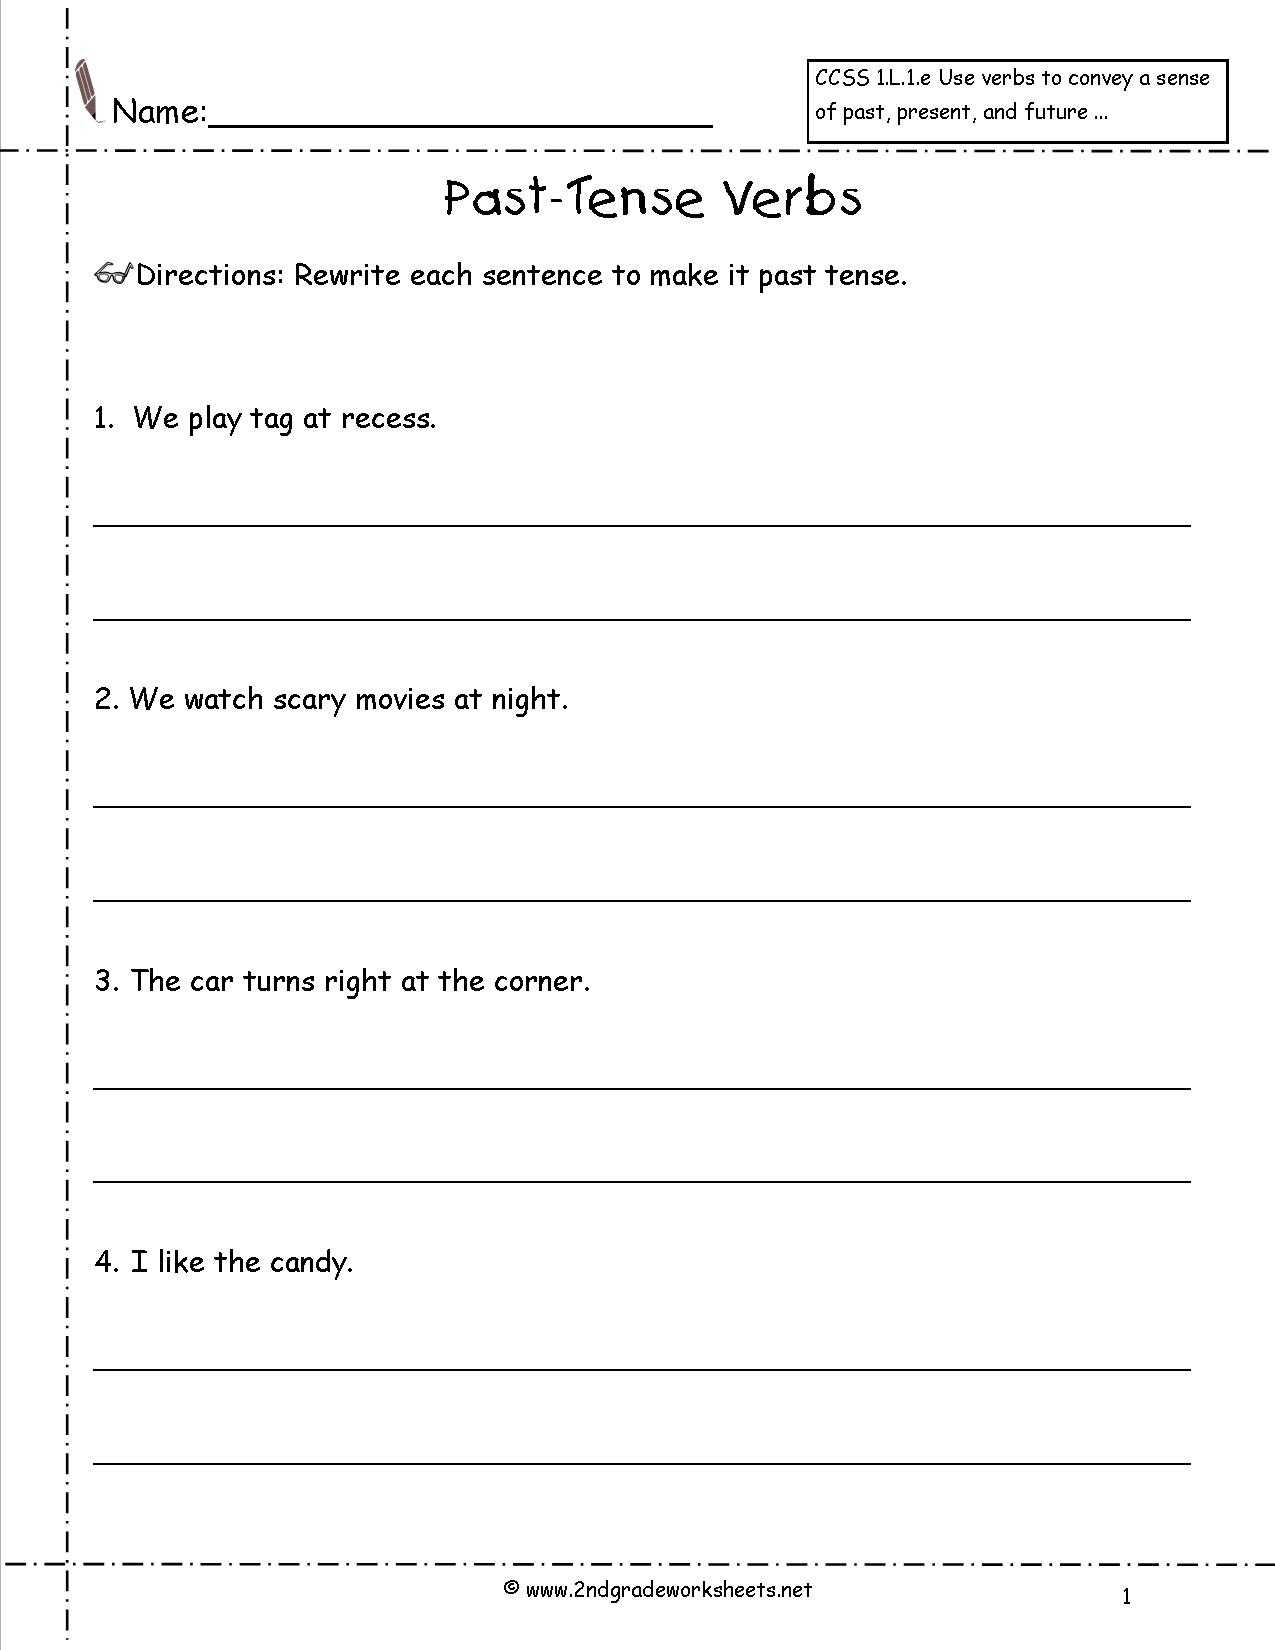 Spanish Verb Conjugation Practice Worksheets with Past Present and Future Tense Verbs Worksheets for 2nd Grade the